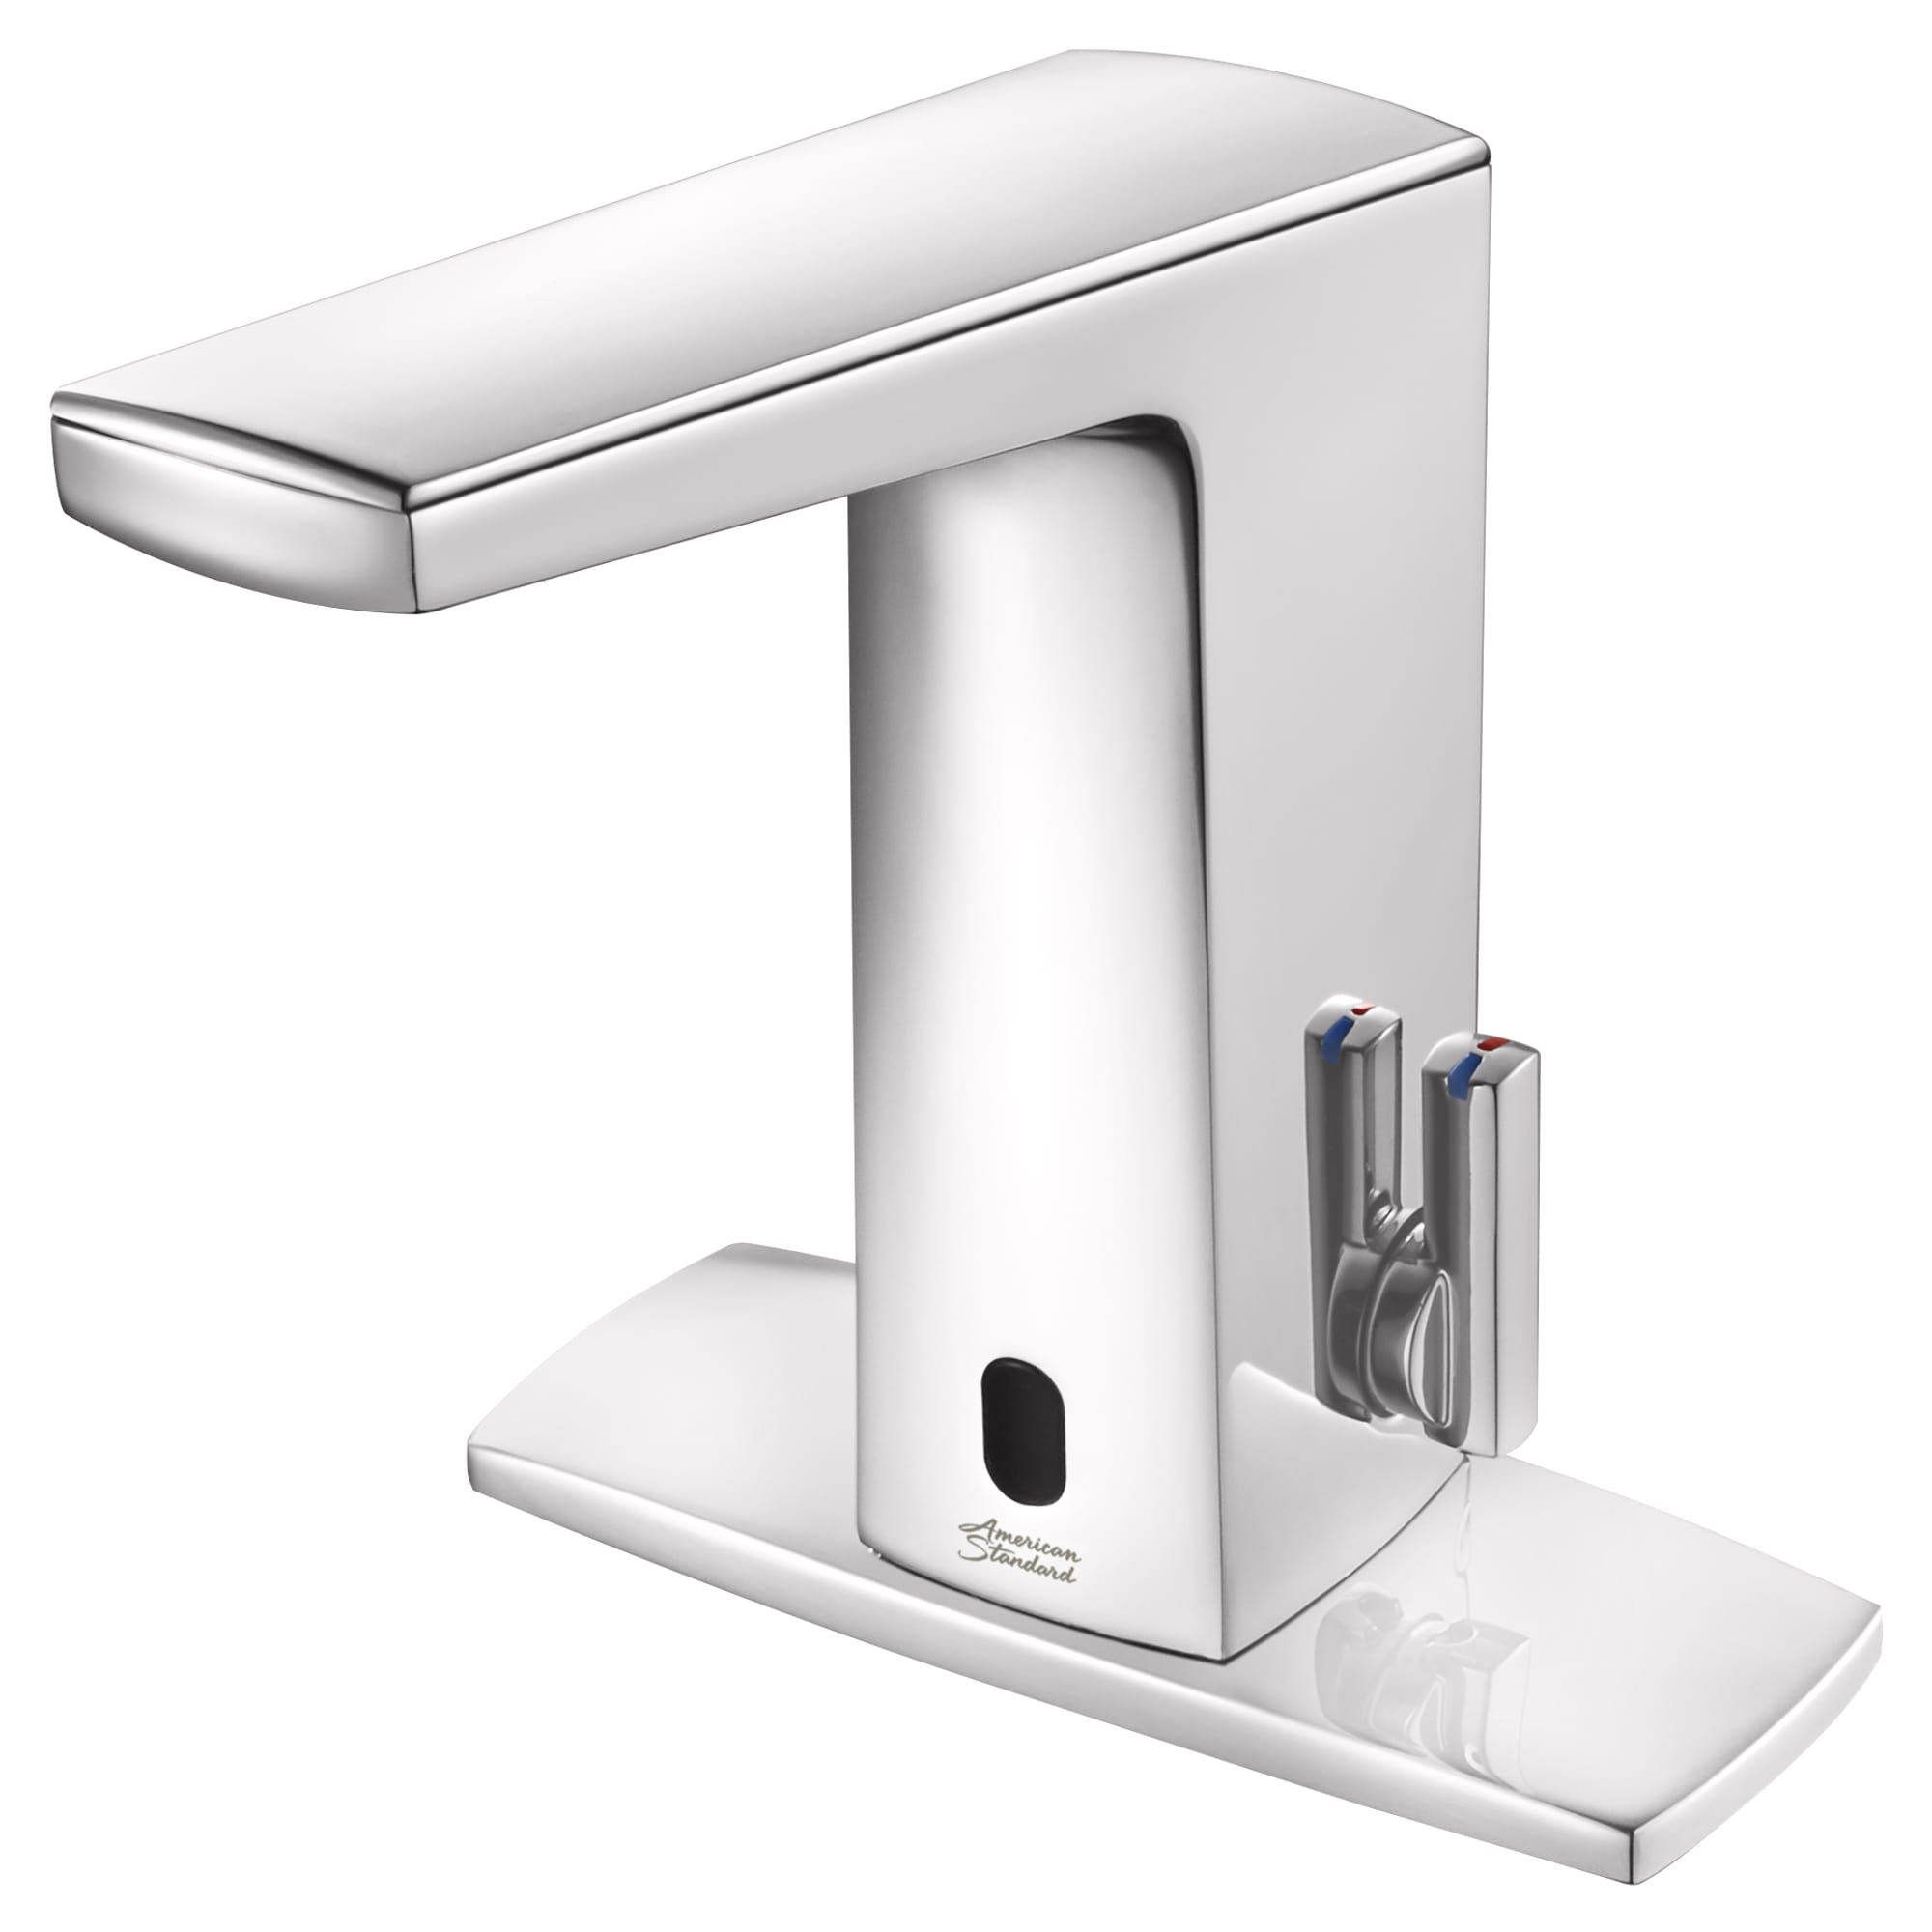 Paradigm® Selectronic® Touchless Faucet, Base Model With SmarTherm Safety Shut-Off + ADM, 1.5 gpm/5.7 Lpm